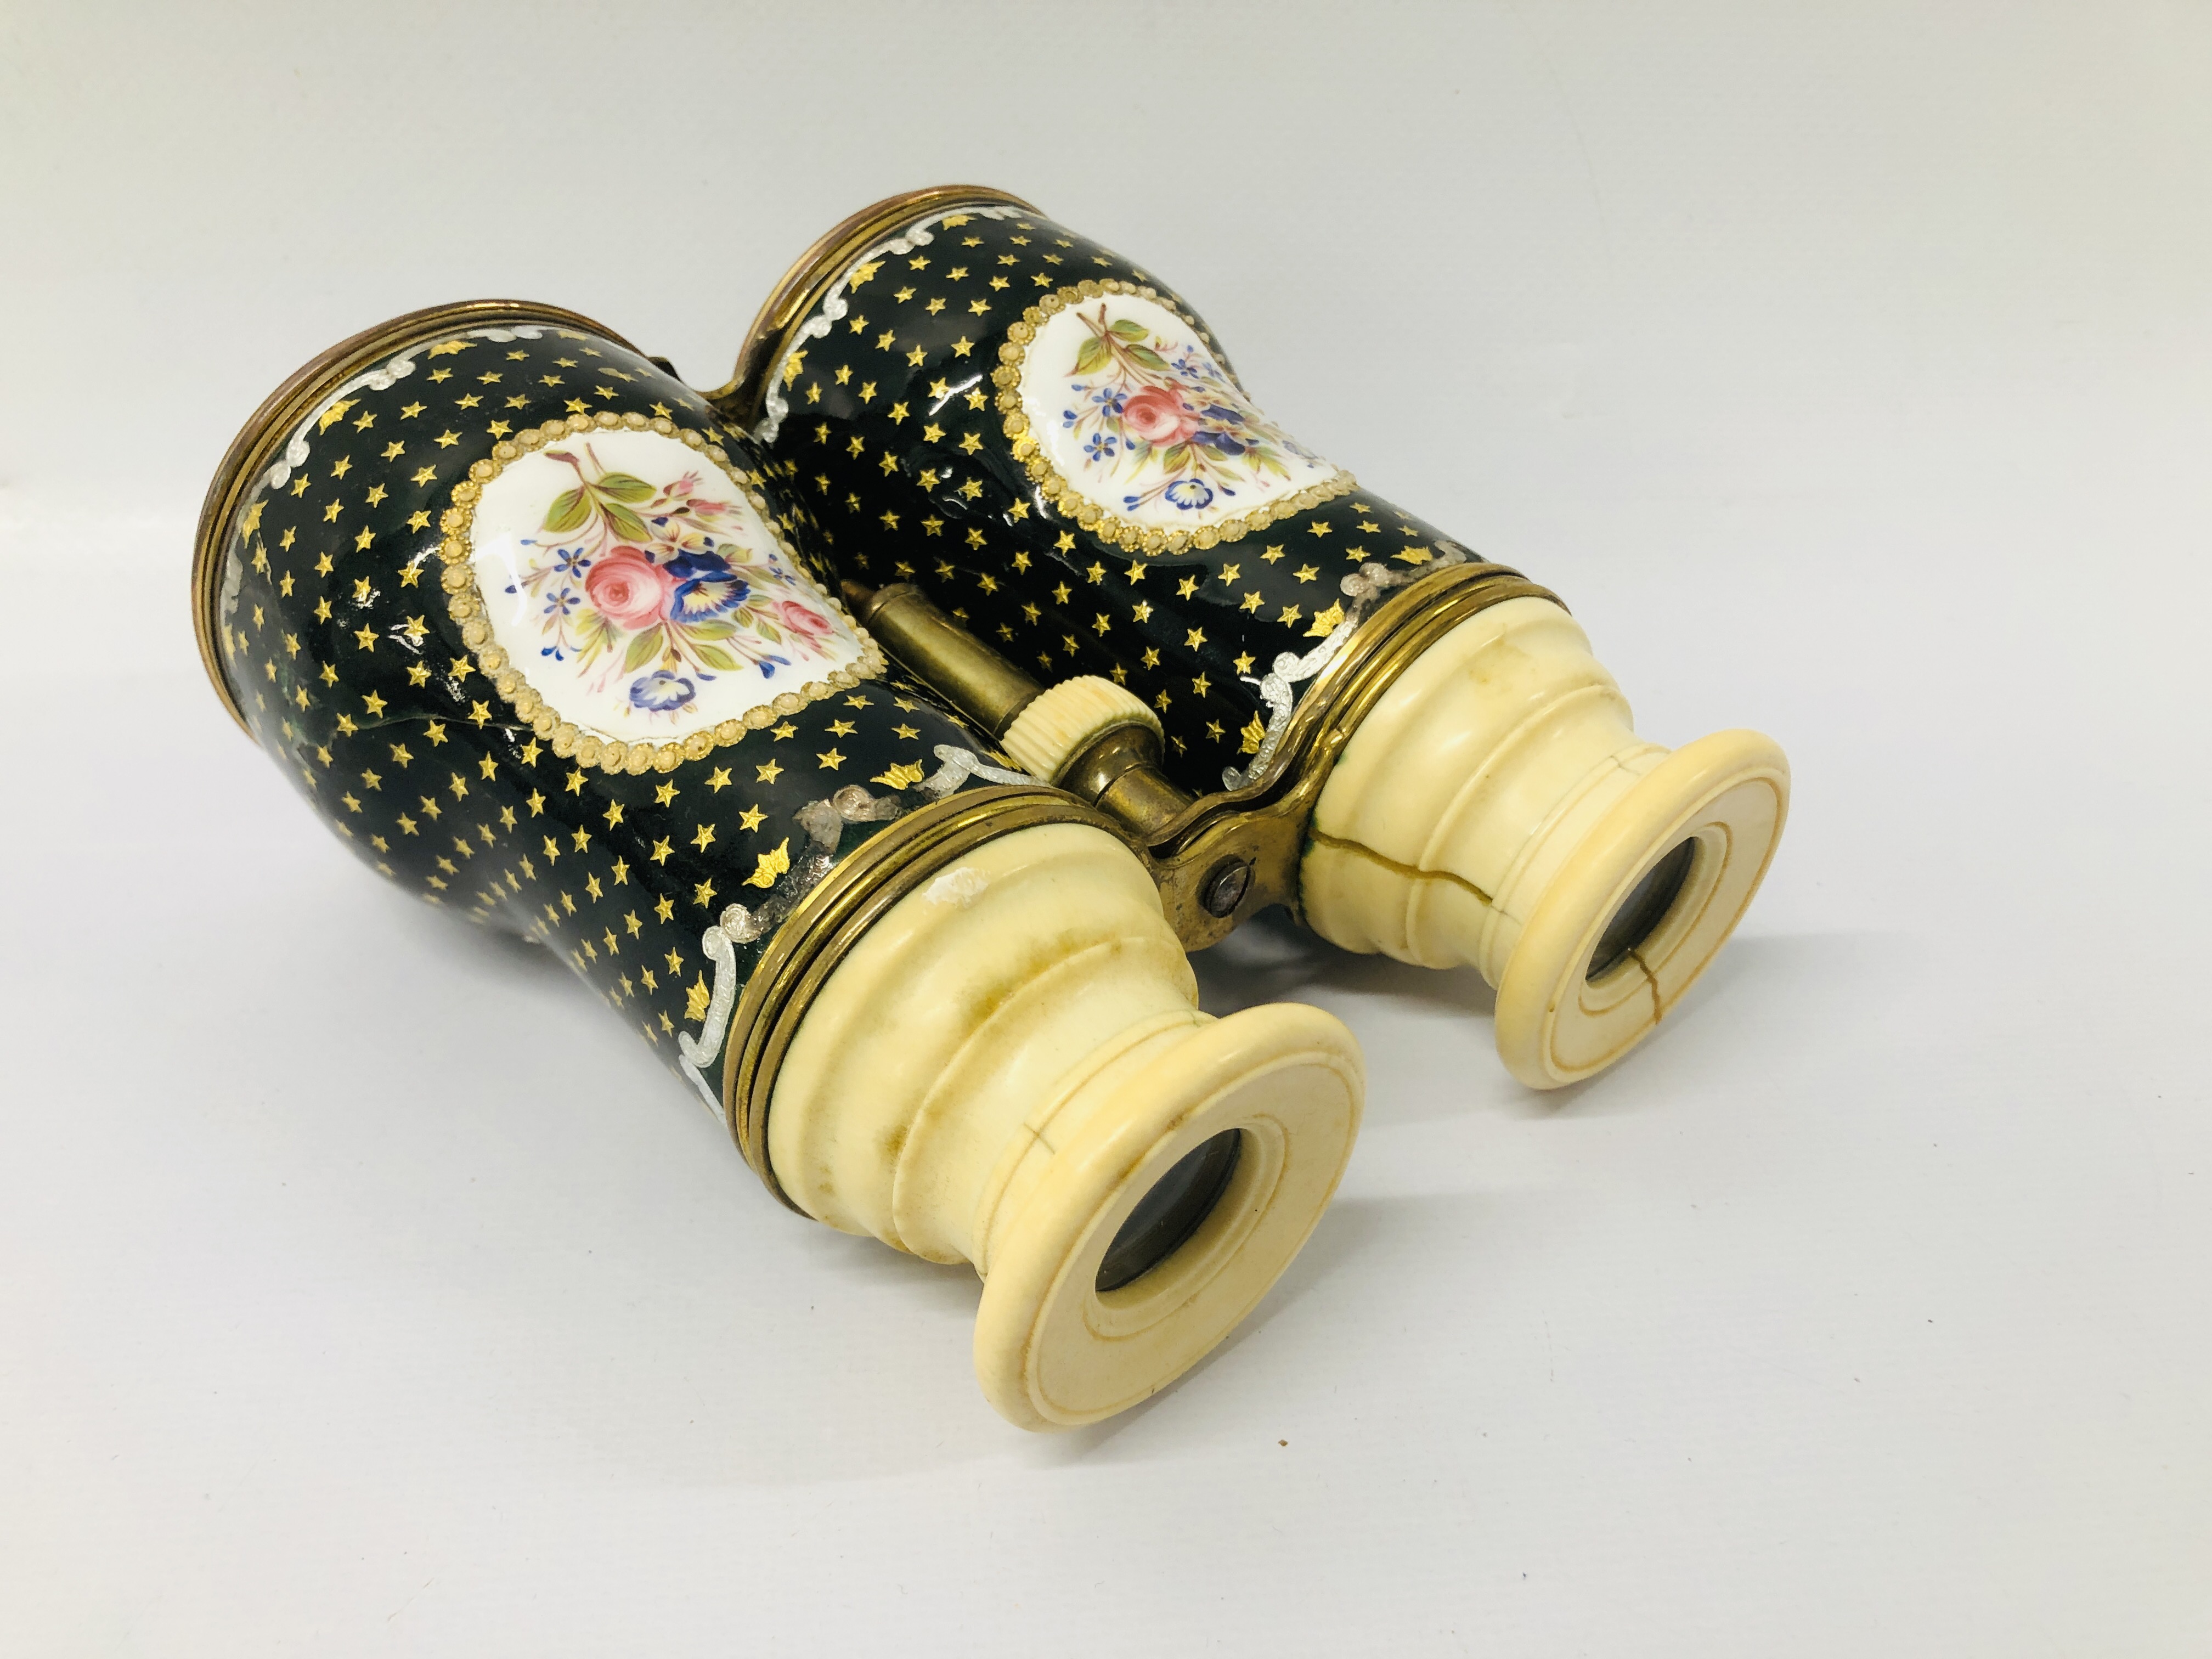 PAIR OF ANTIQUE IVORY AND ENAMEL OPERA GLASSES C1880 - Image 5 of 8